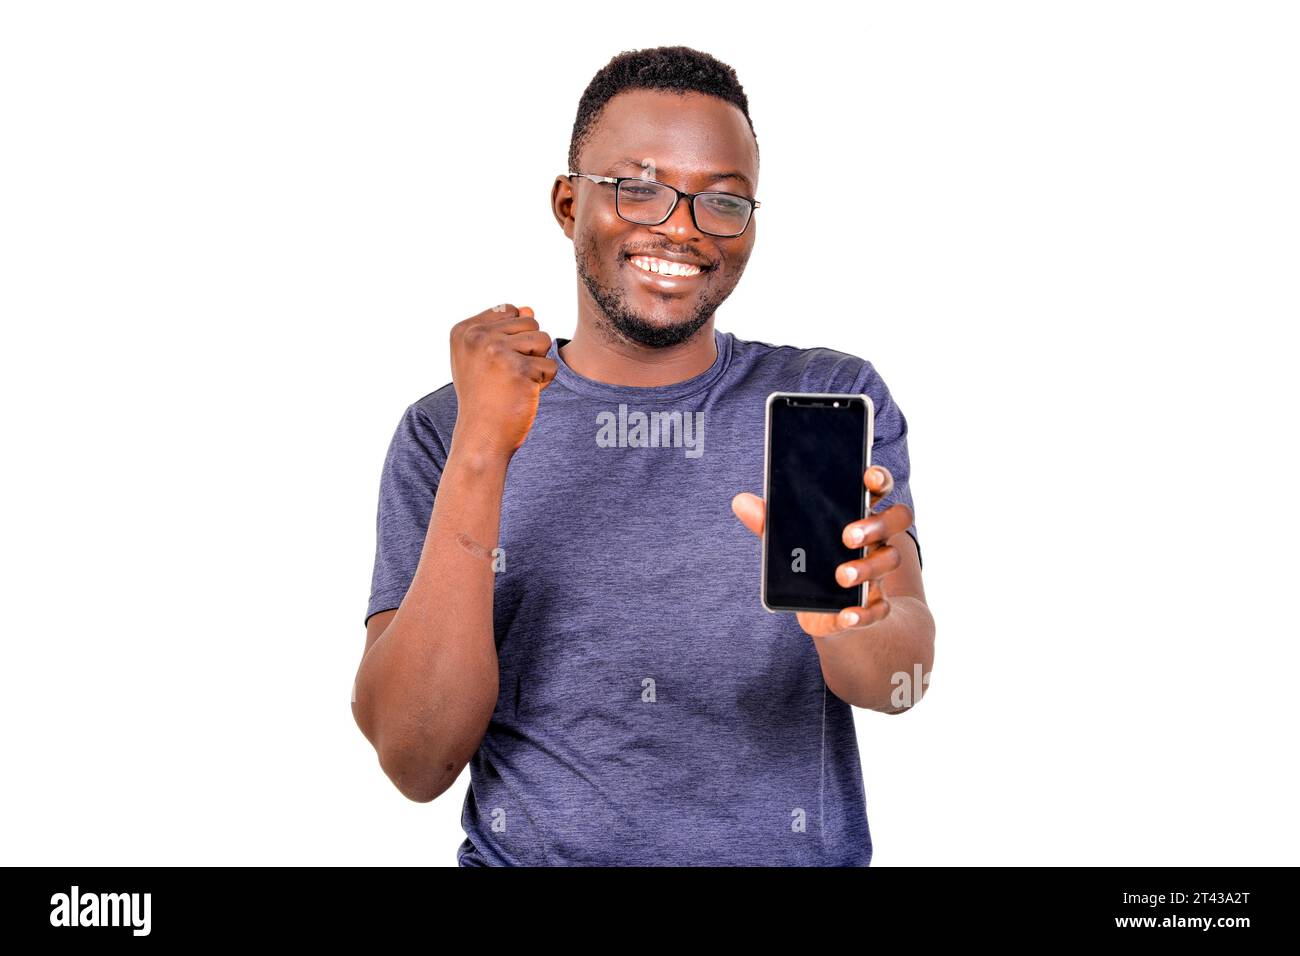 a handsome man in glasses standing on white background presenting cell phone and making victory gesture laughing. Stock Photo